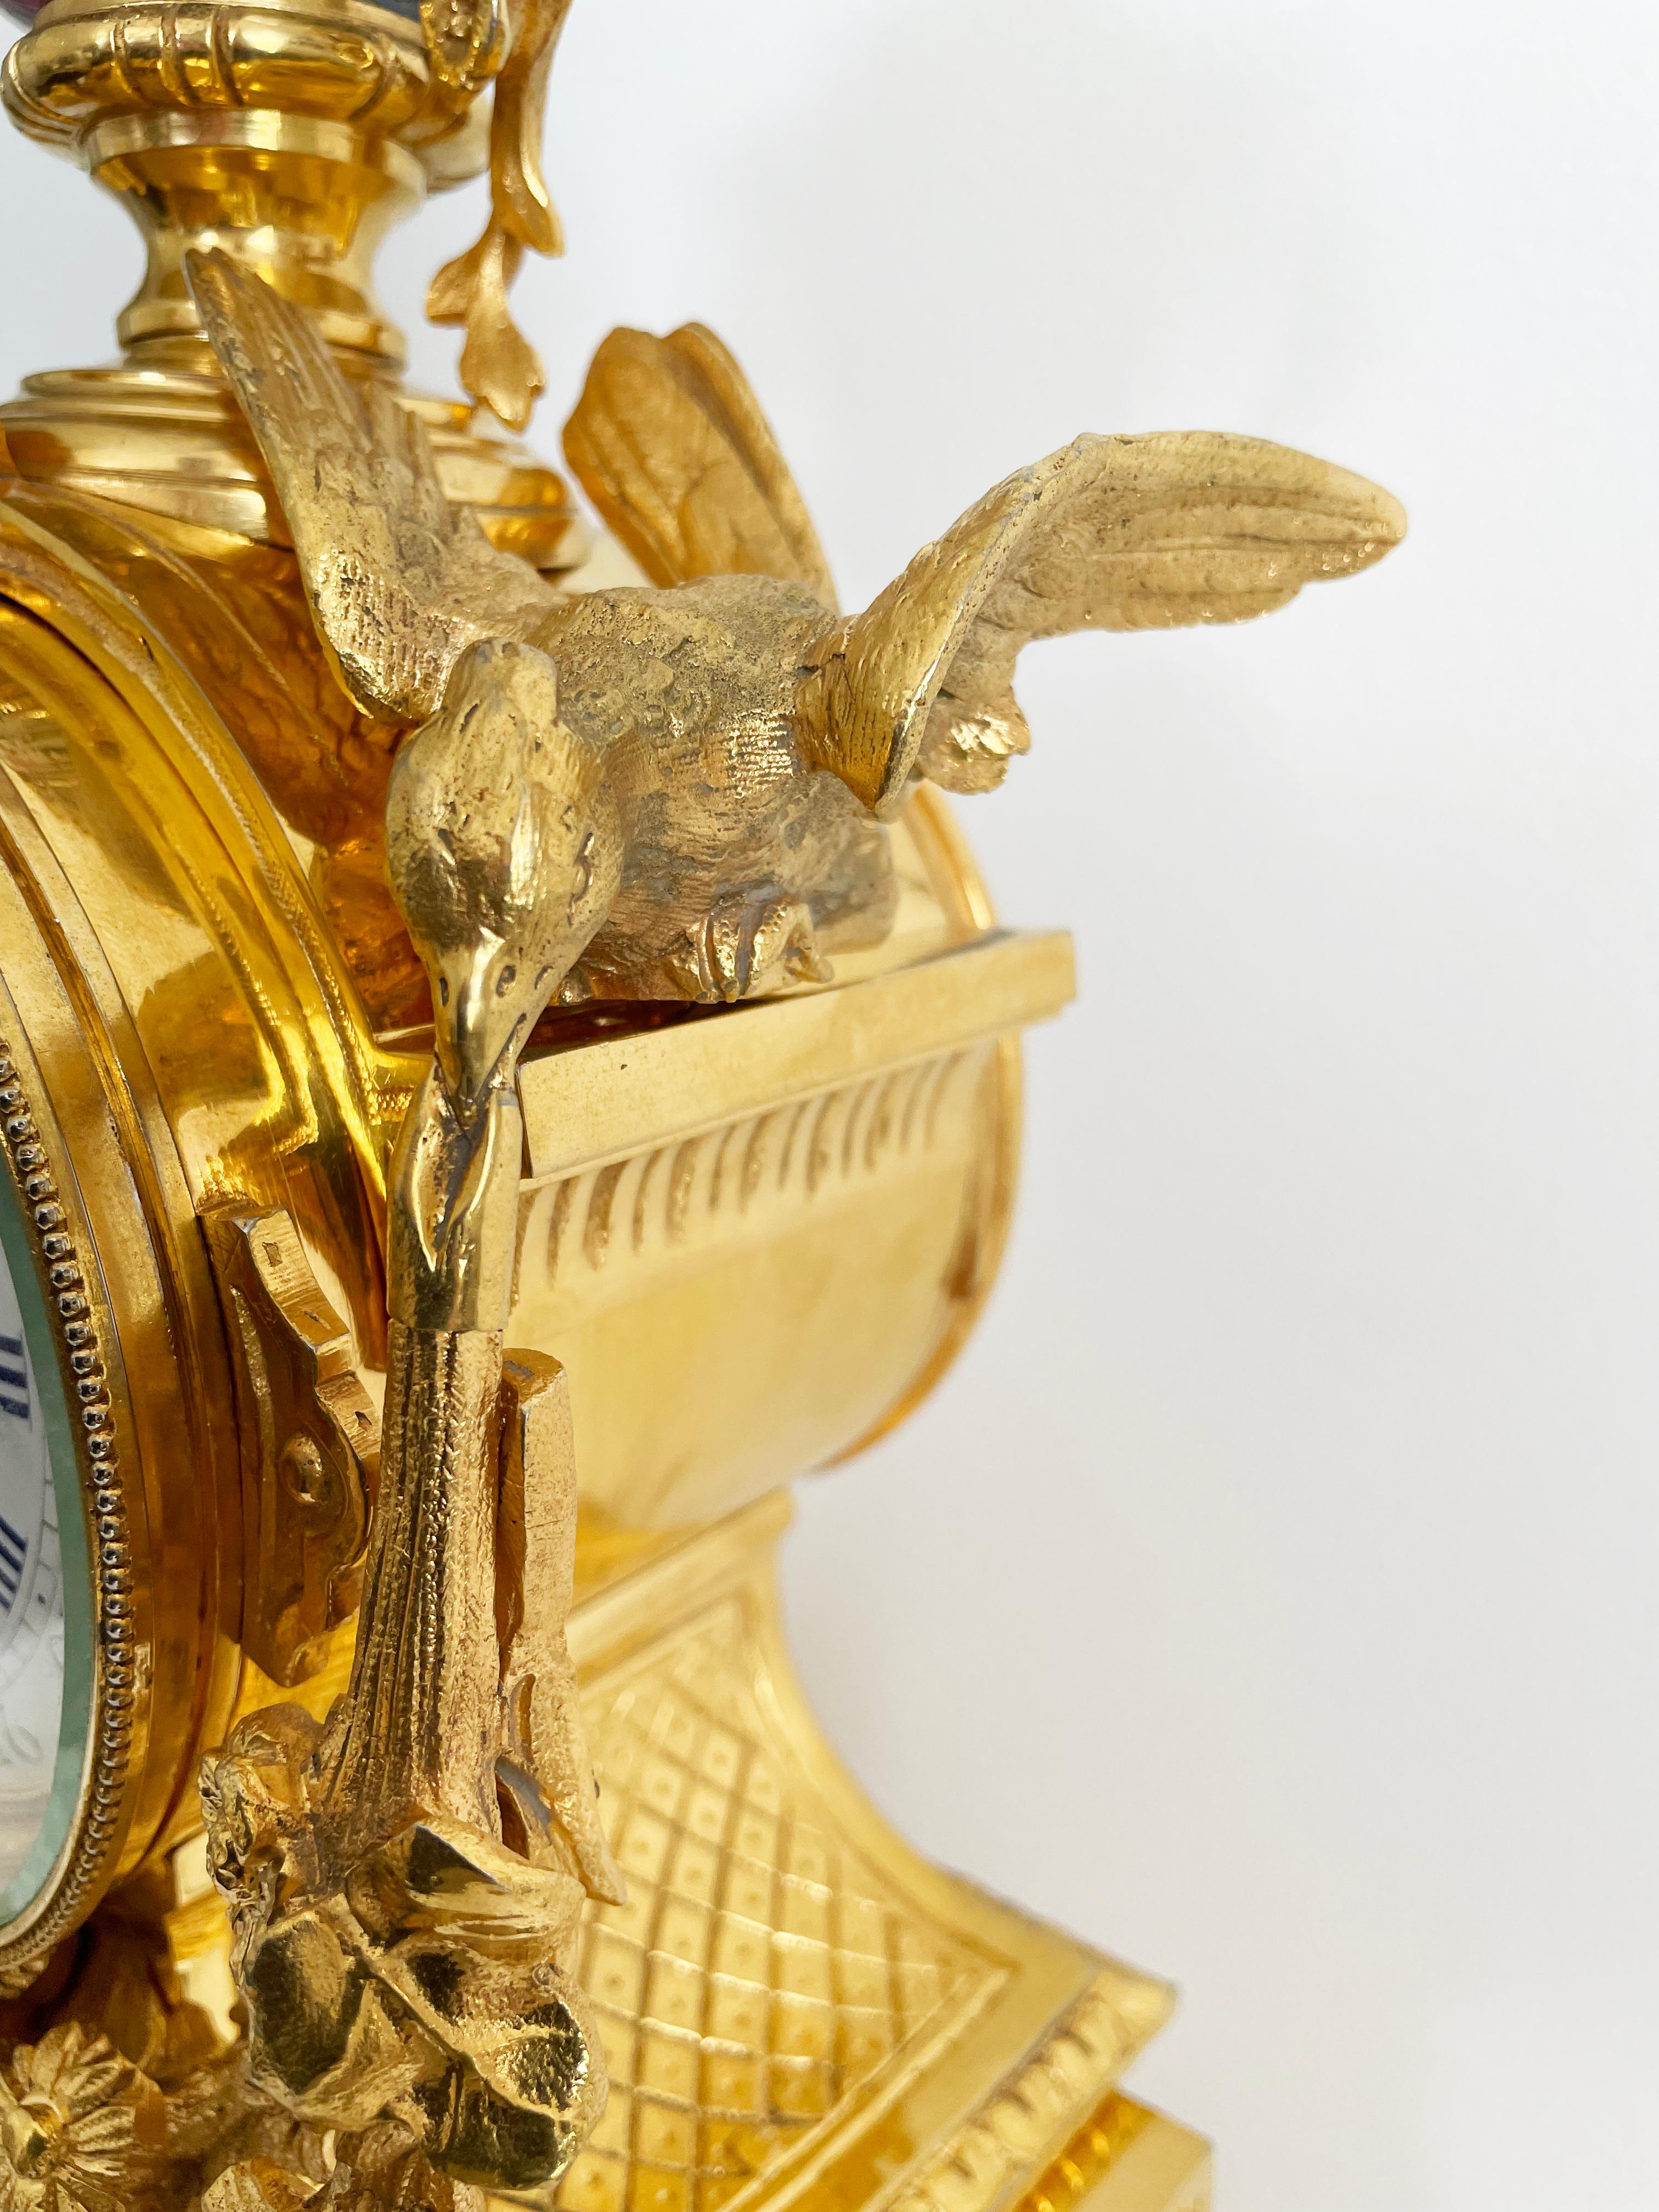 French Gilt Bronze And Porcelain Chinoiserie Themed Mantel Clock, 19th Century For Sale 4